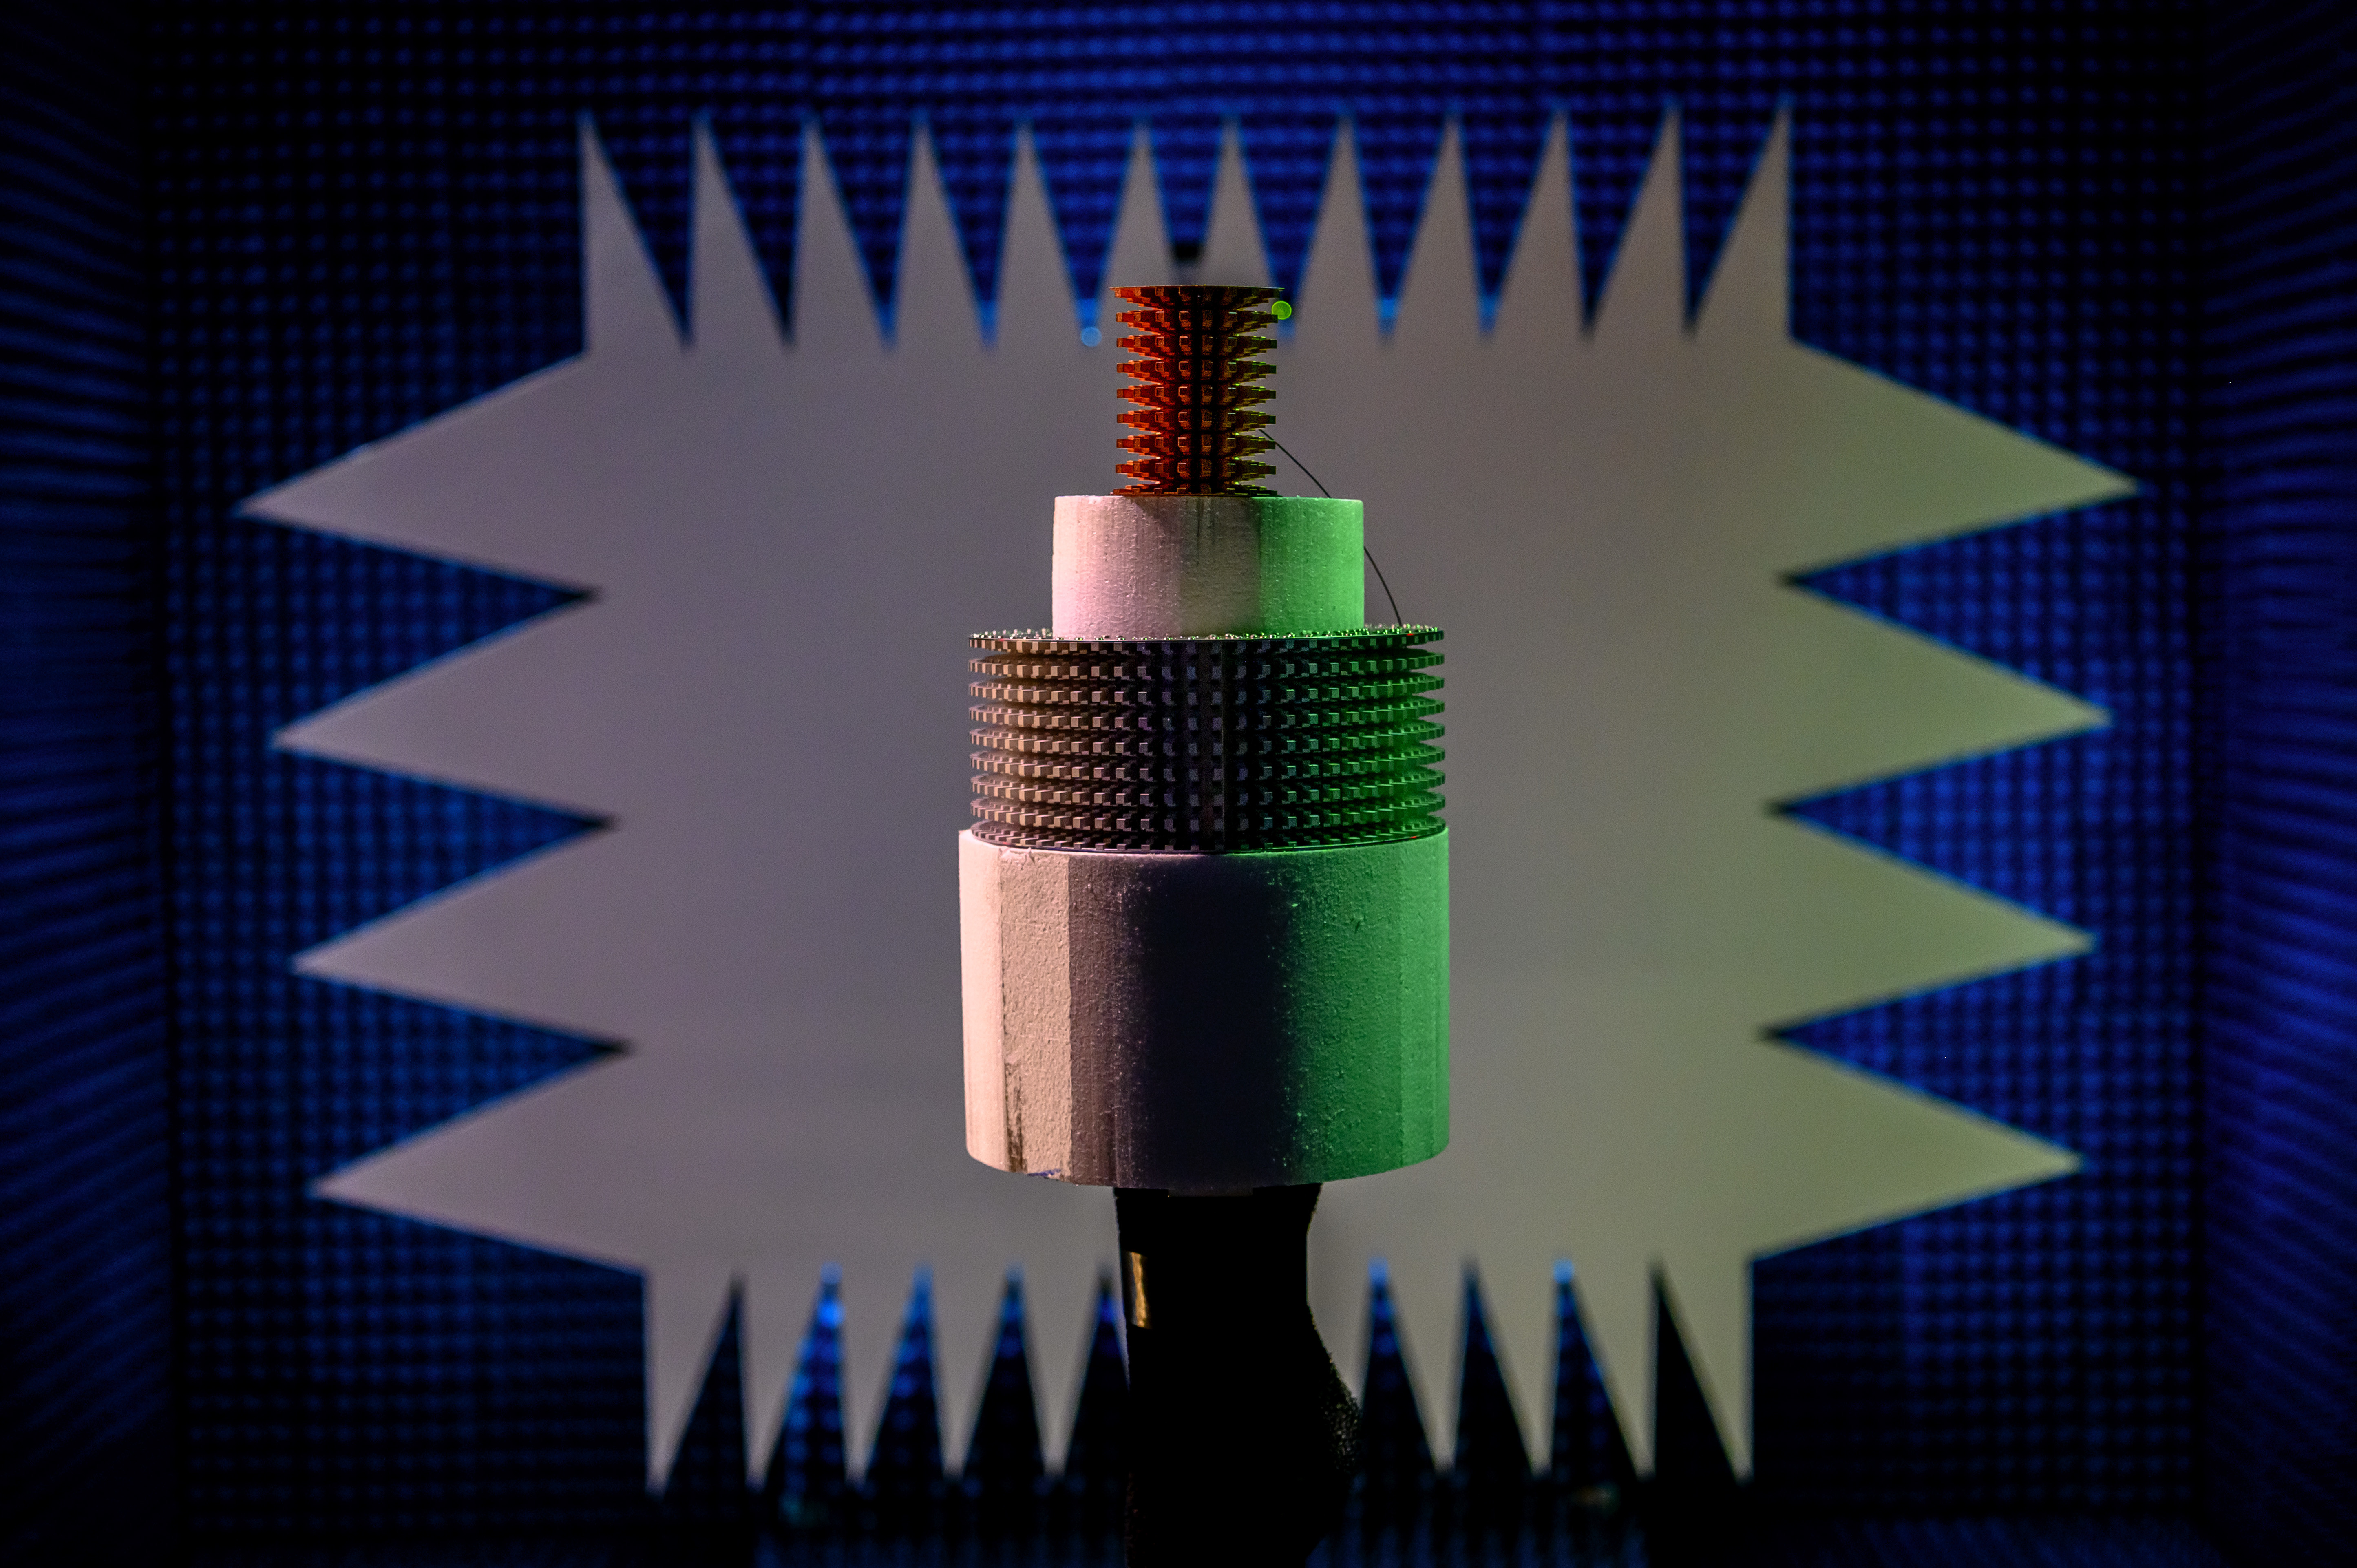 New NRL 3D-printed antenna designs reduce cost, weight and size > U.S. Naval Research Laboratory > News